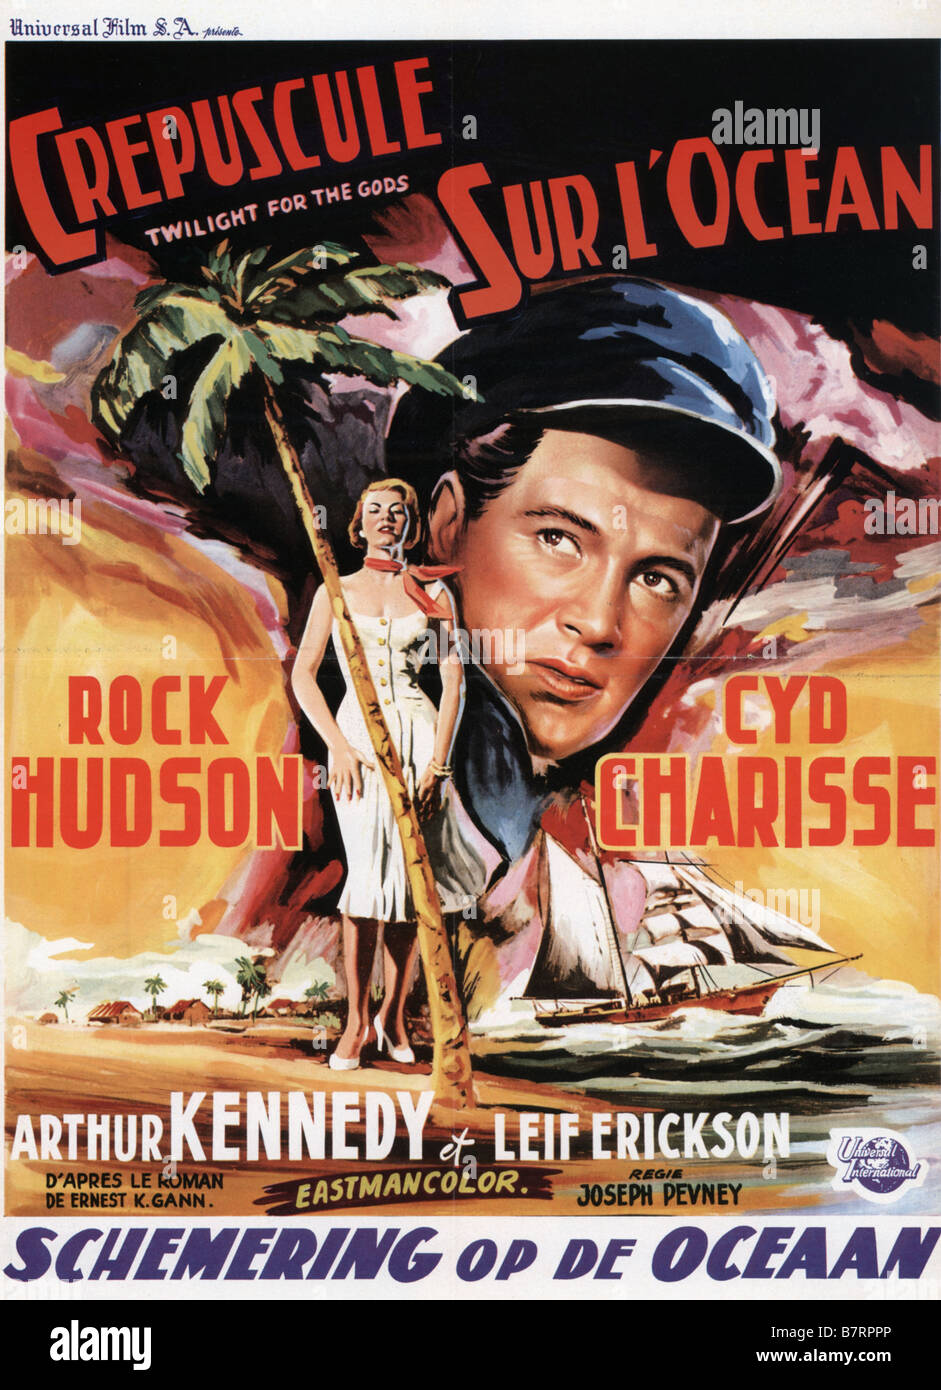 CREPUSCULE SUR L'OCEAN TWILIGHT FOR THE GODS  Year: 1959 USA affiche, poster  Director: Joseph Pevney Stock Photo